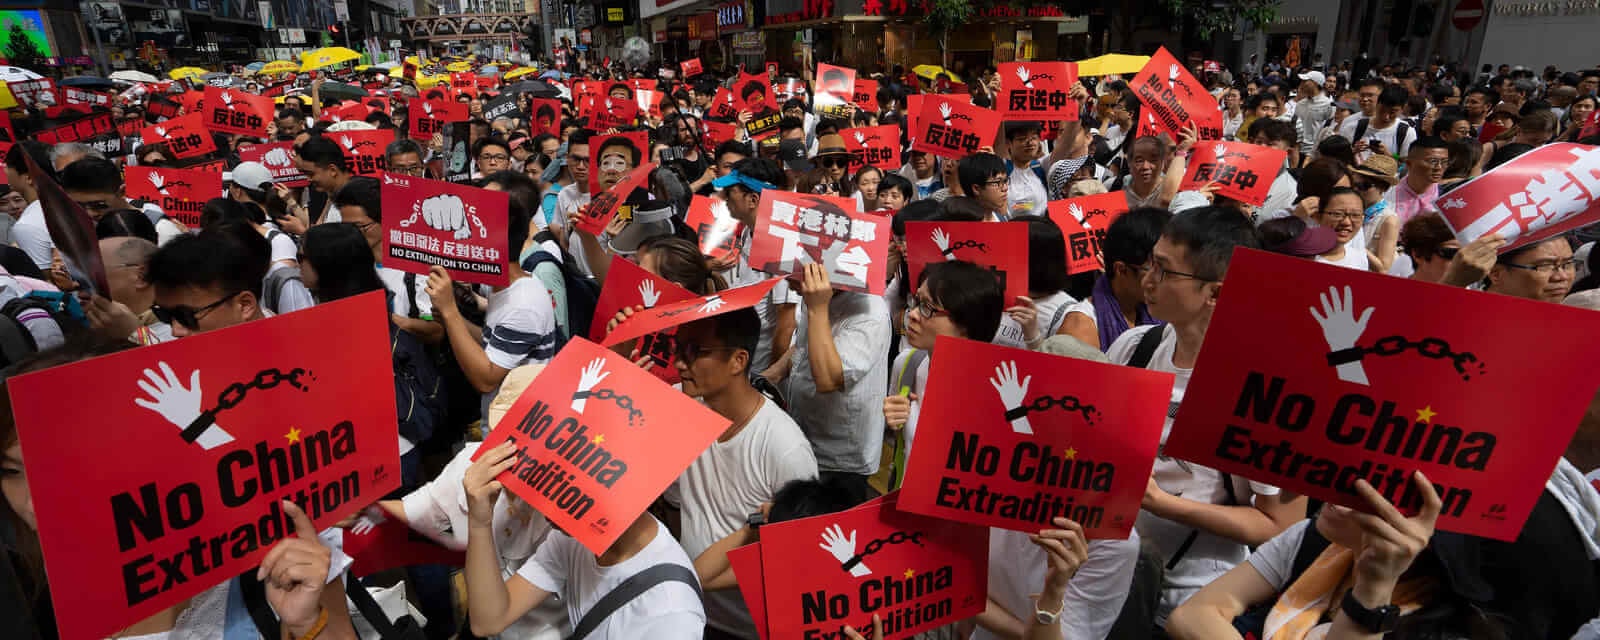 Protesters in China holding signs